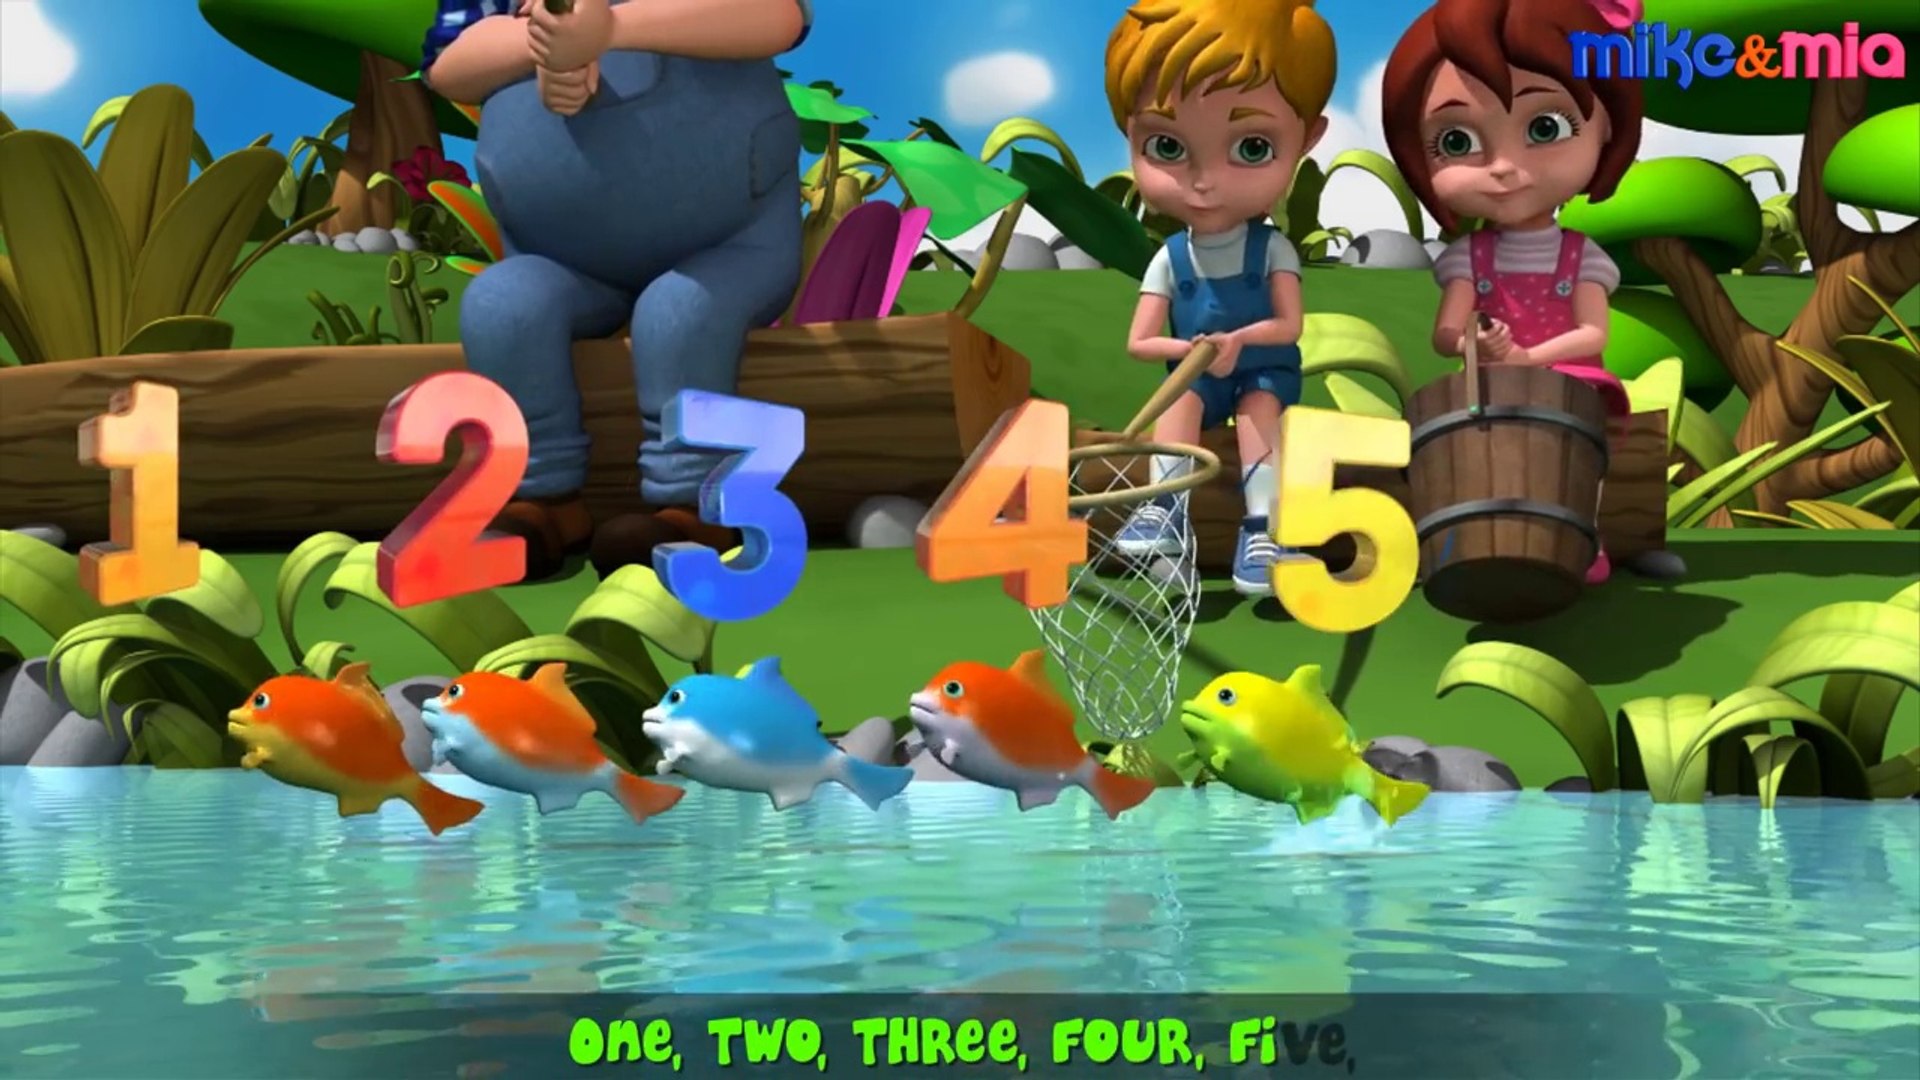 12345 Once I caught a Fish Alive English Nursery Rhymes Songs for Children  by HD Nursery Rhymes - video Dailymotion